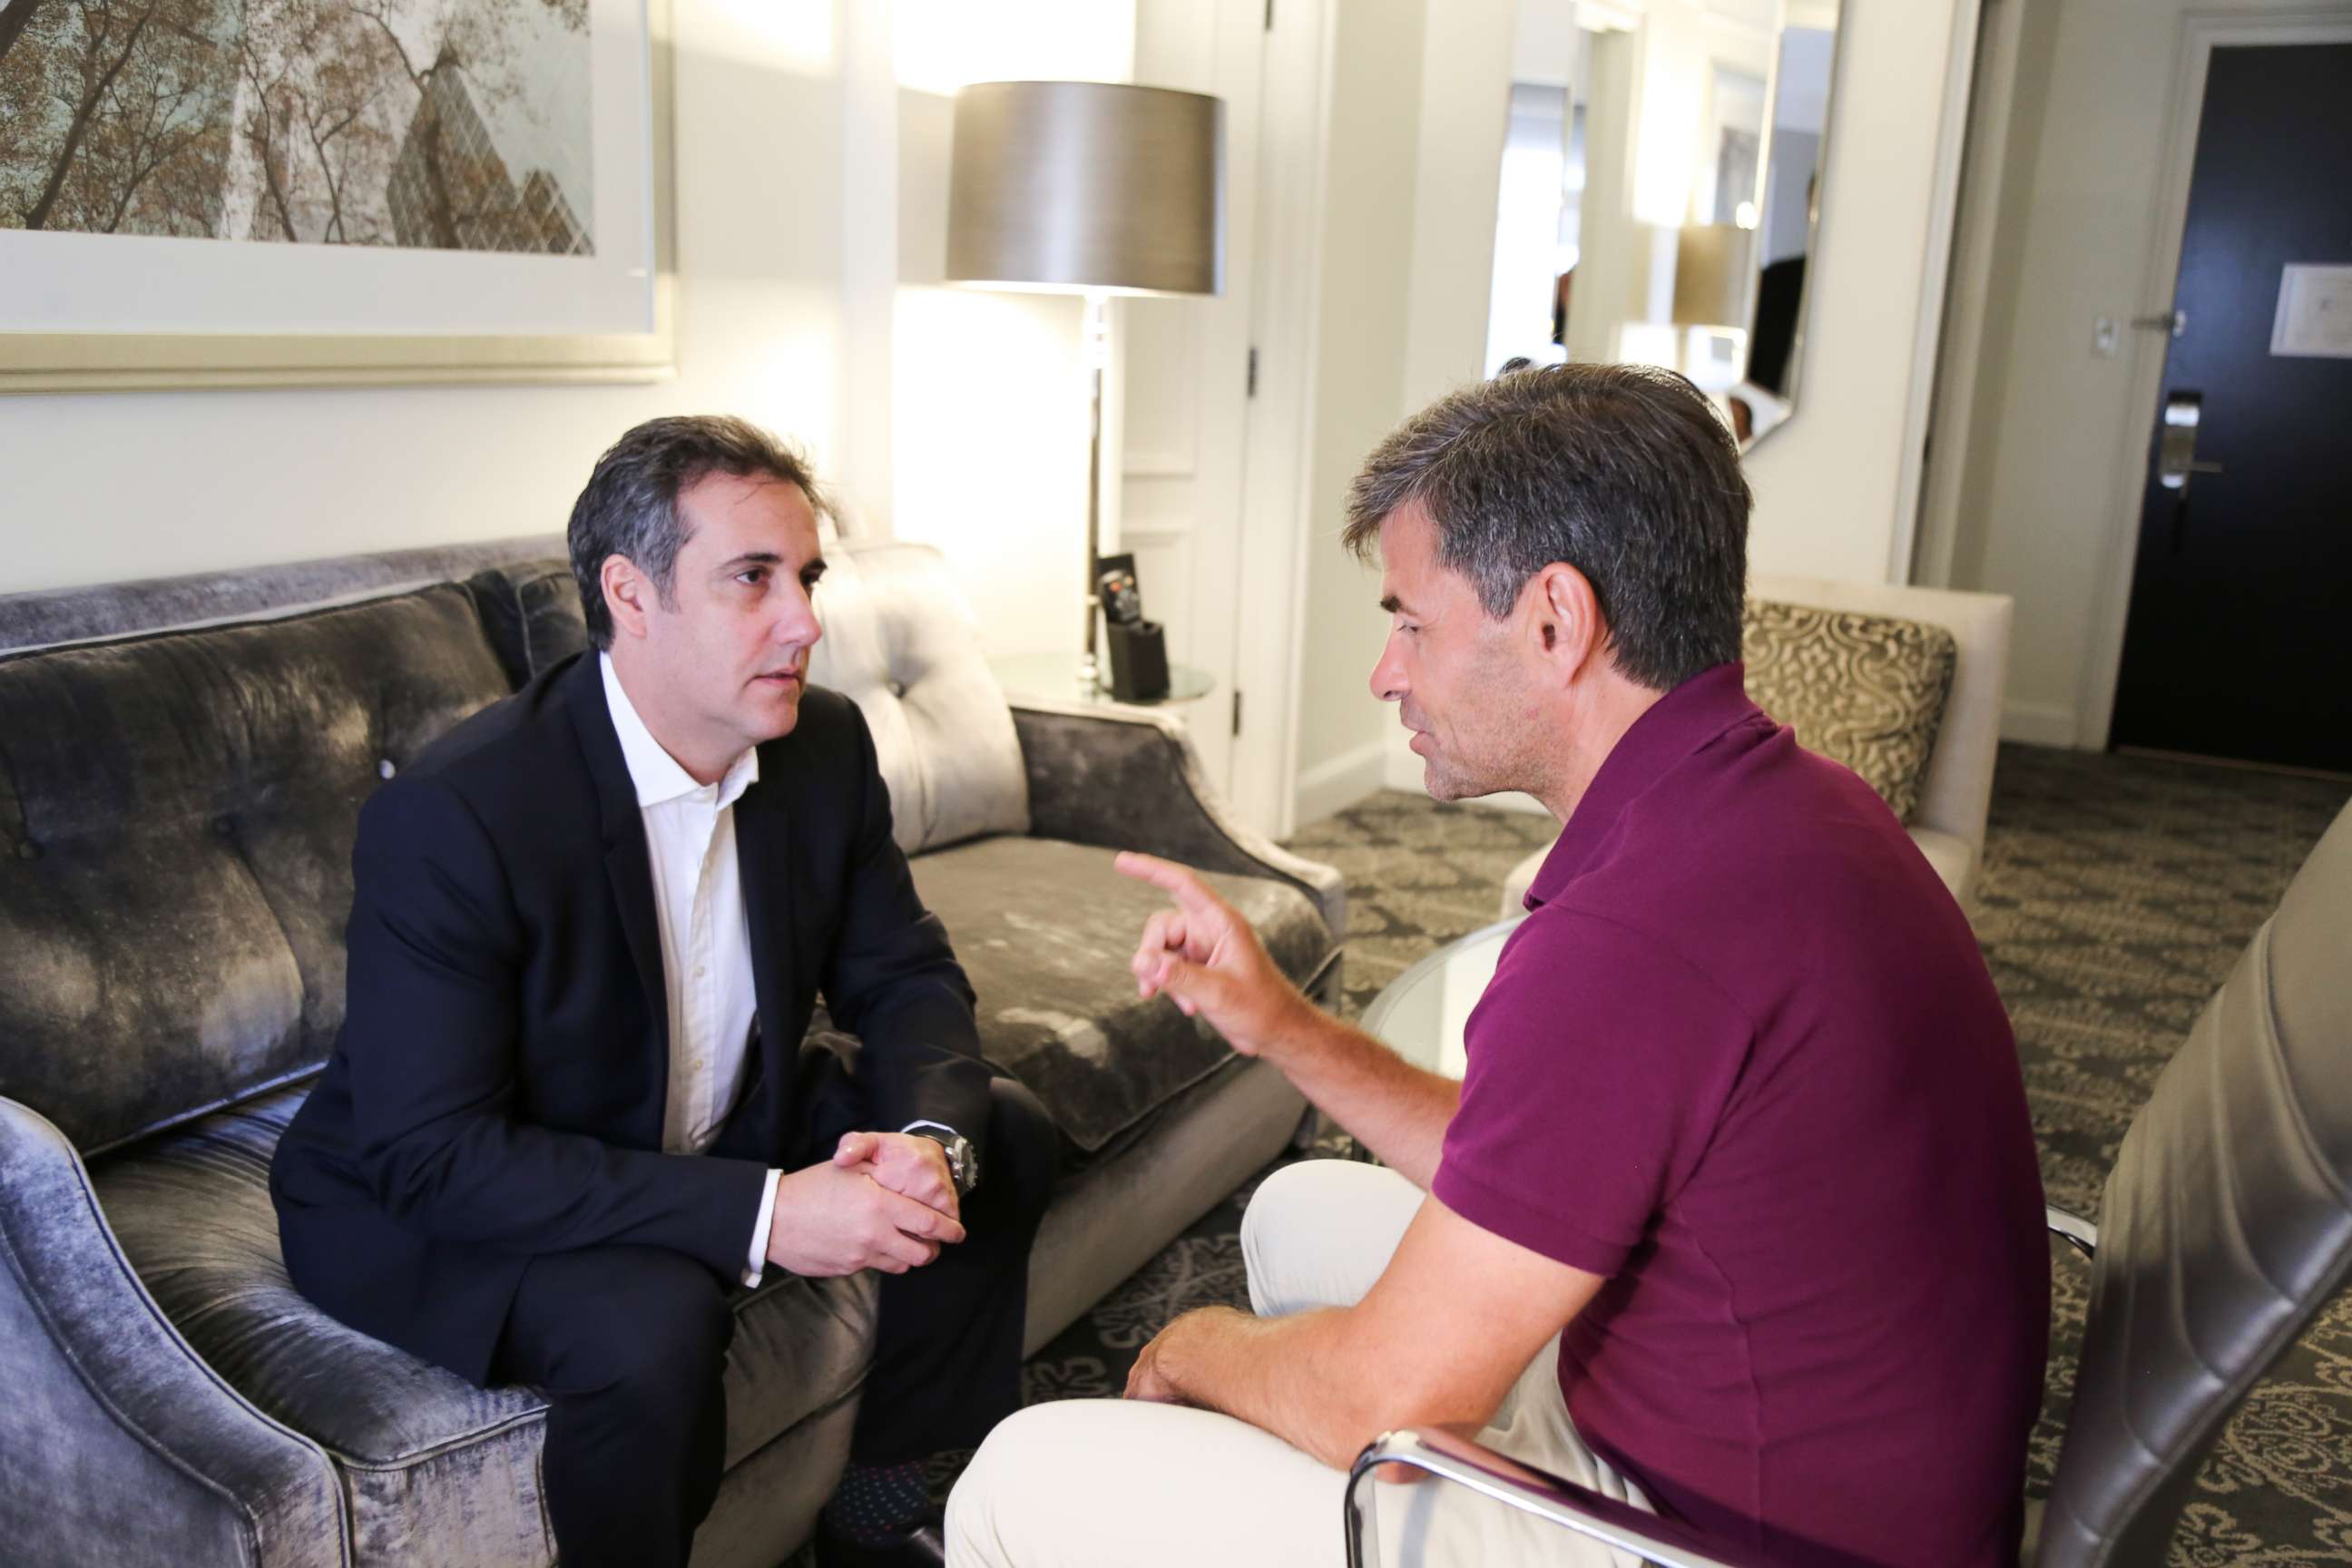 PHOTO: ABC News' George Stephanopoulos interviewing Michael Cohen, who was formerly an attorney for President Donald Trump.